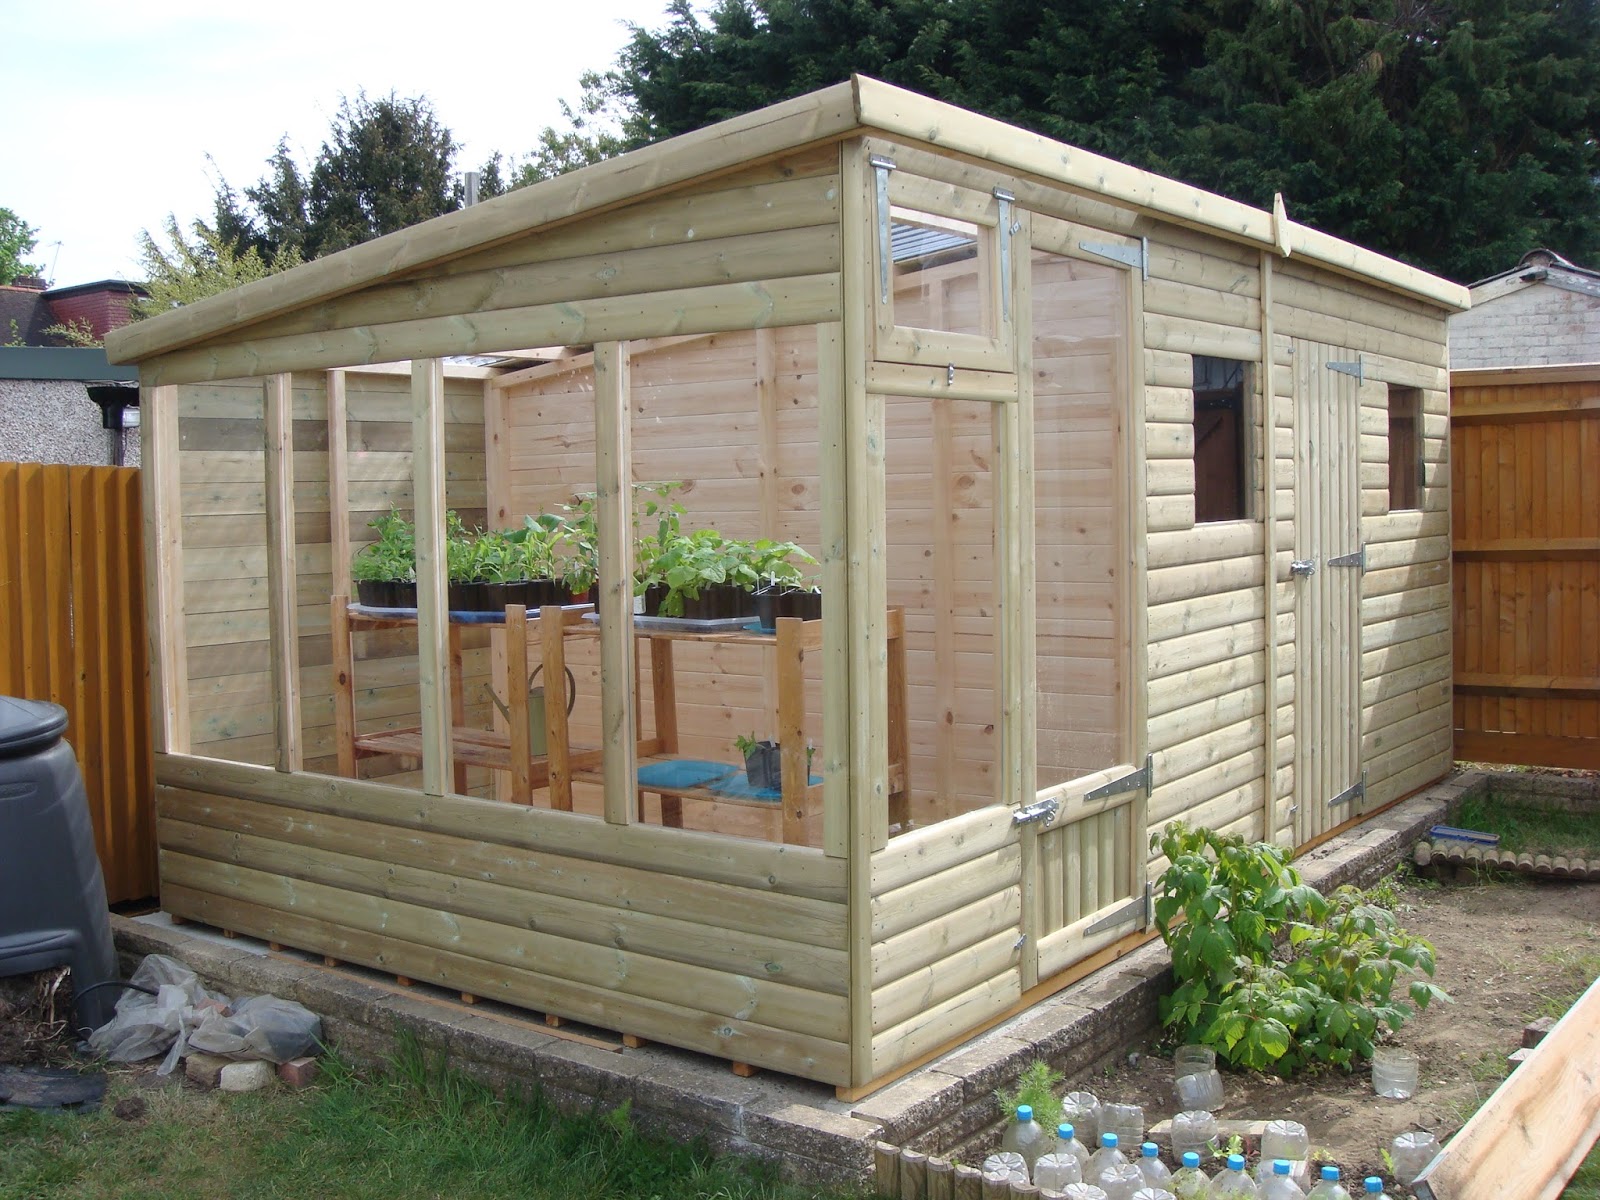 Veg patch from scratch: The new shed/greenhouse combo has arrived